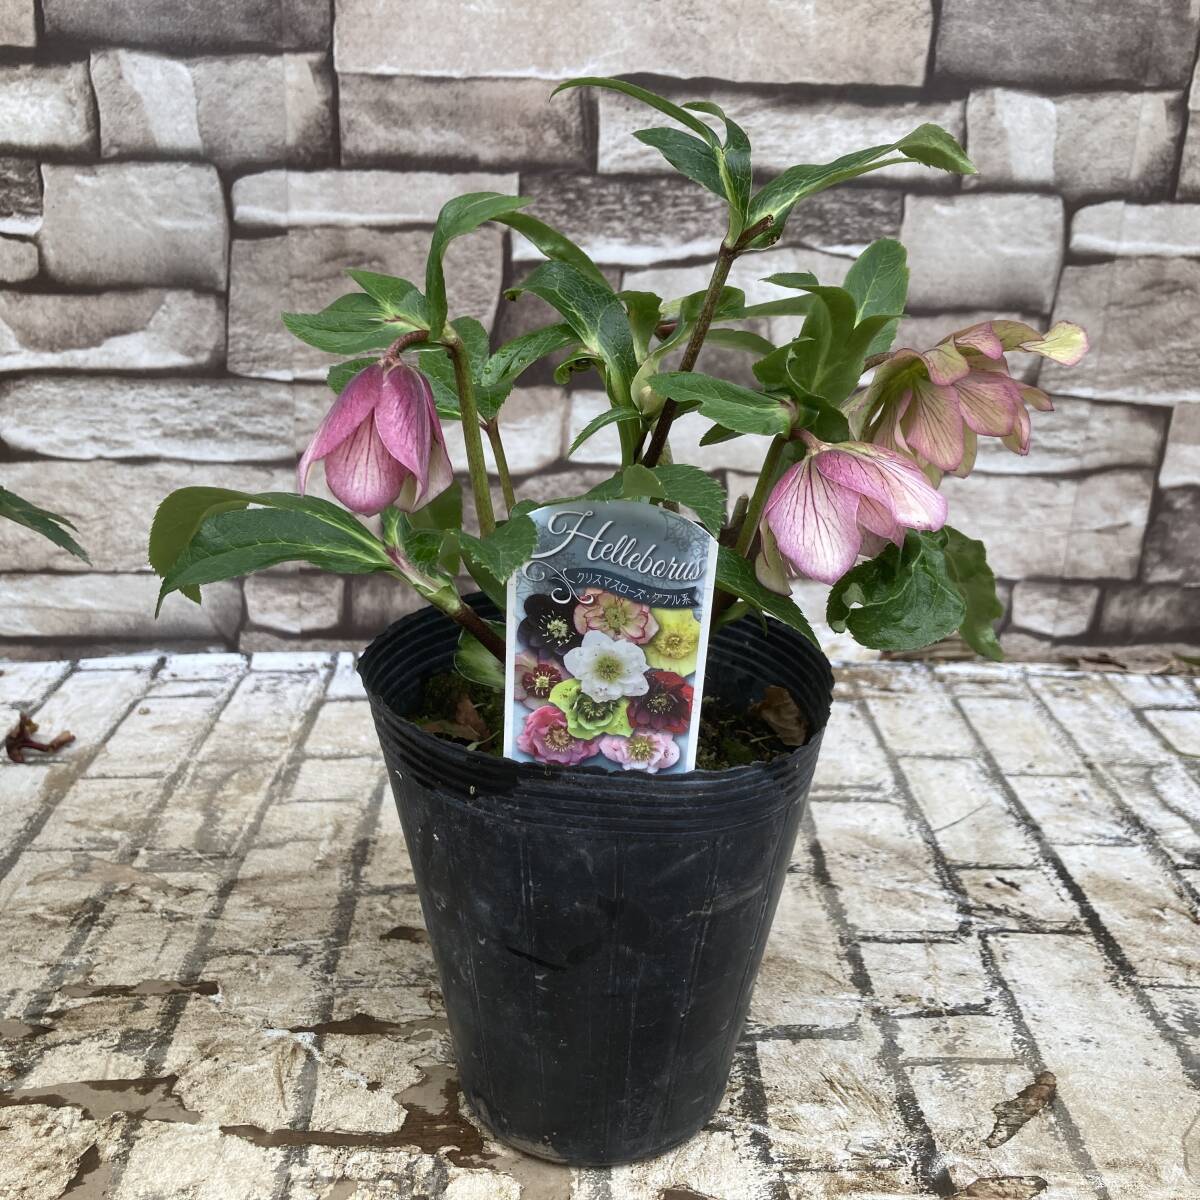 * Christmas rose double 5 number pot various 6 pot set 3 month 24 day photographing reality goods I